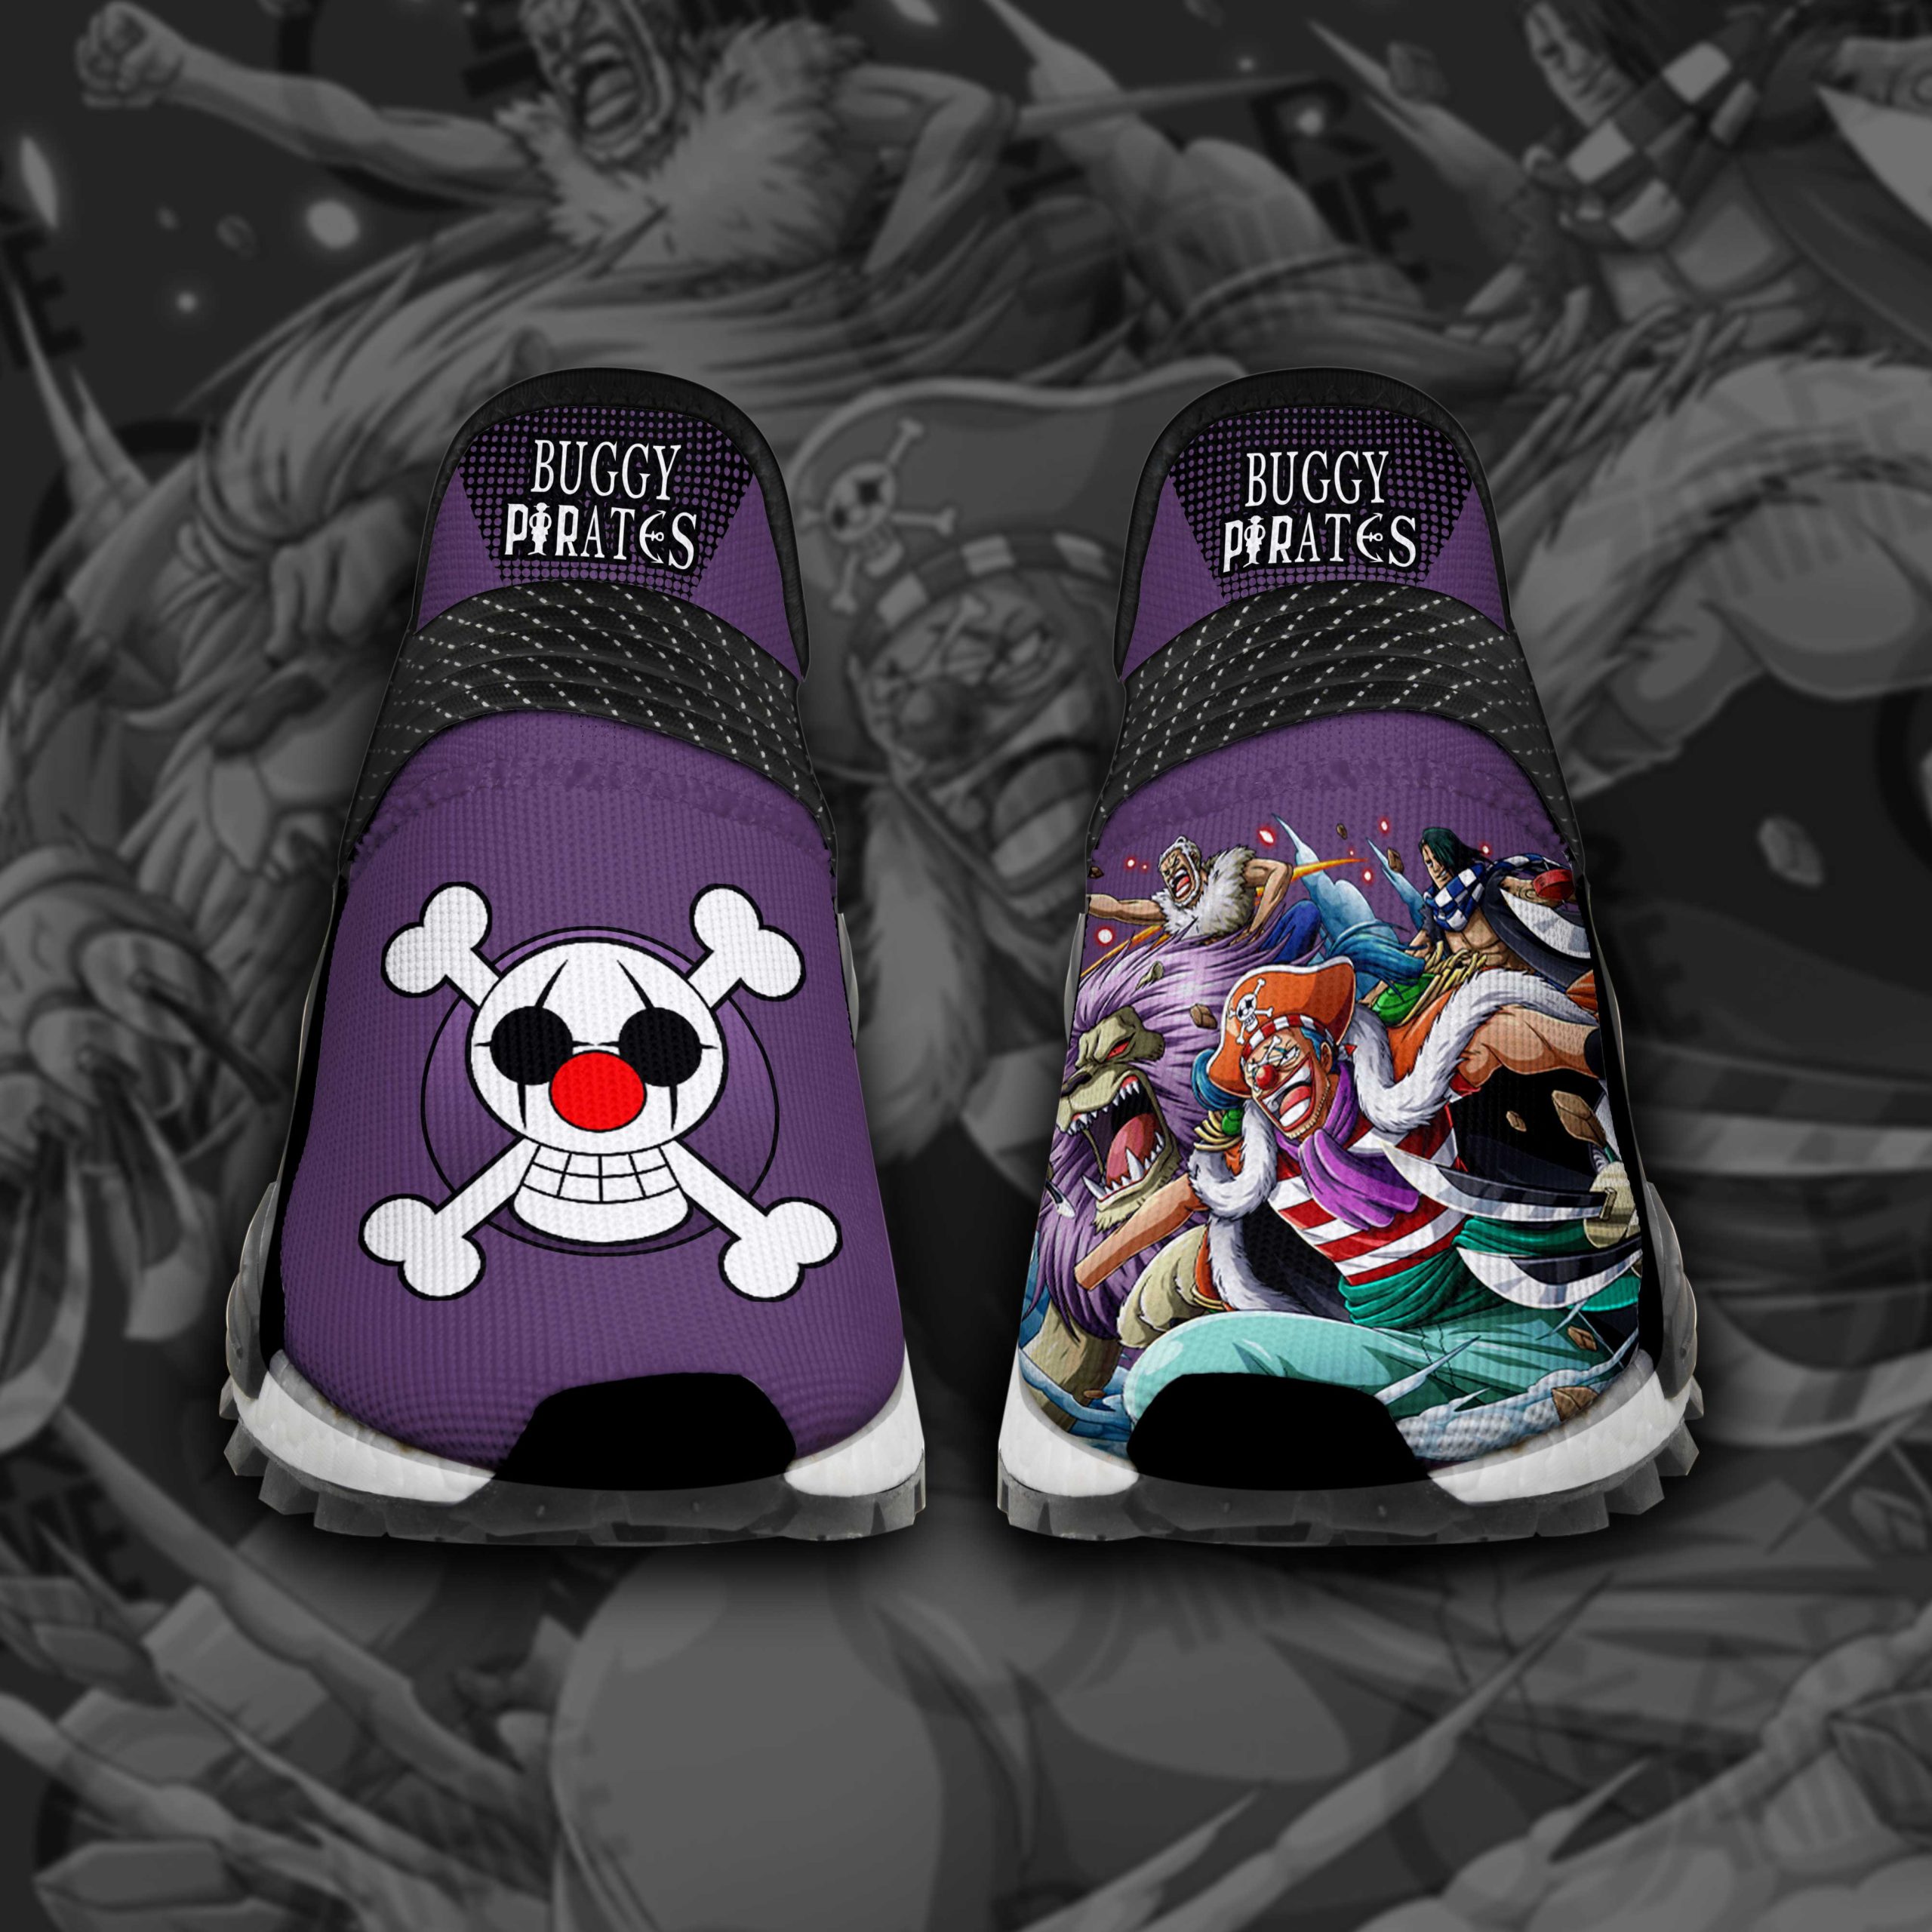 Buggy Pirates Shoes One Piece Custom Anime Shoes TT12